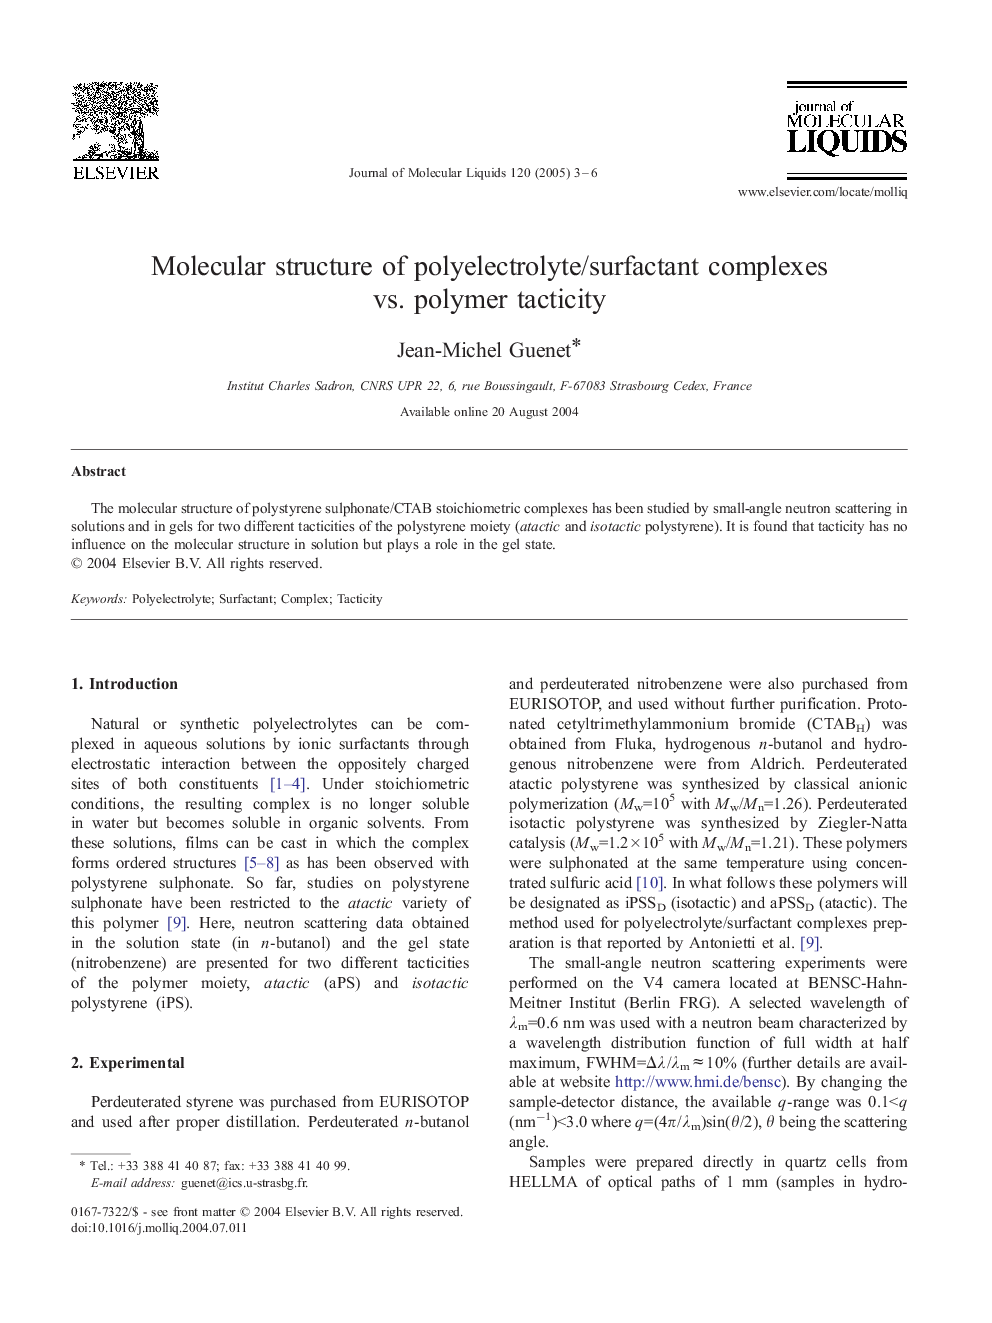 Molecular structure of polyelectrolyte/surfactant complexes vs. polymer tacticity